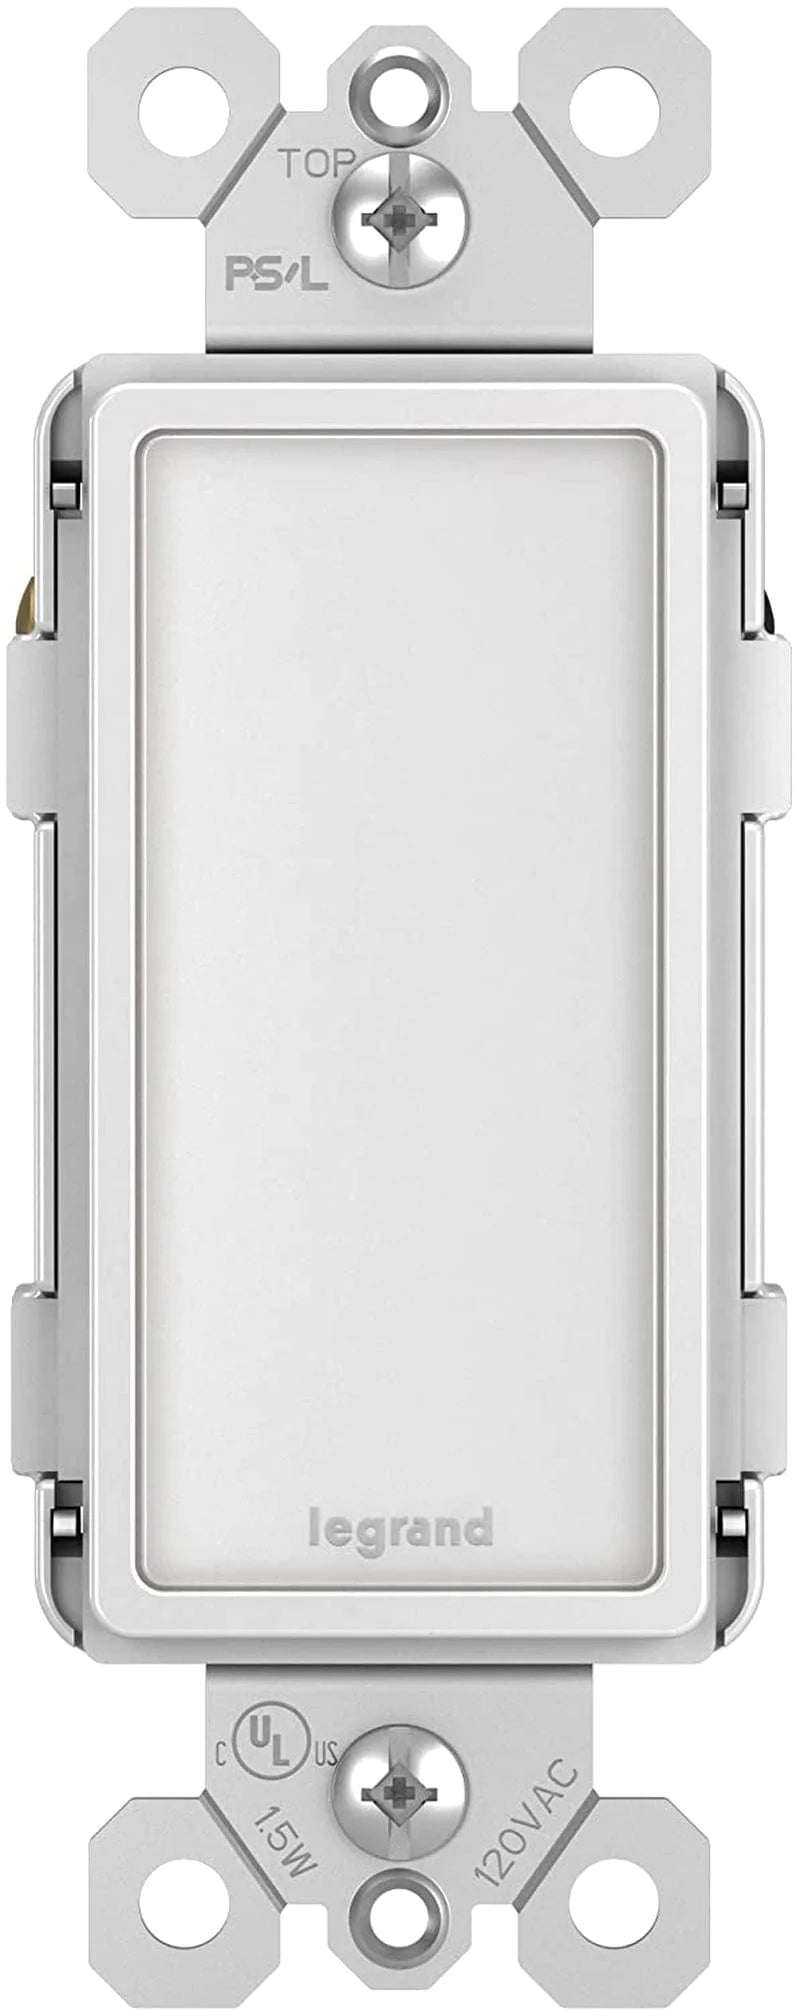 Legrand Radiant Adjustable LED Night Light Outlet, Nightlight Electrical Outlets for Bedroom and Hallway, Full, White, NTLFULLWCC6 Home & Garden > Lighting > Night Lights & Ambient Lighting Legrand-Pass & Seymour White Full Light Resistant